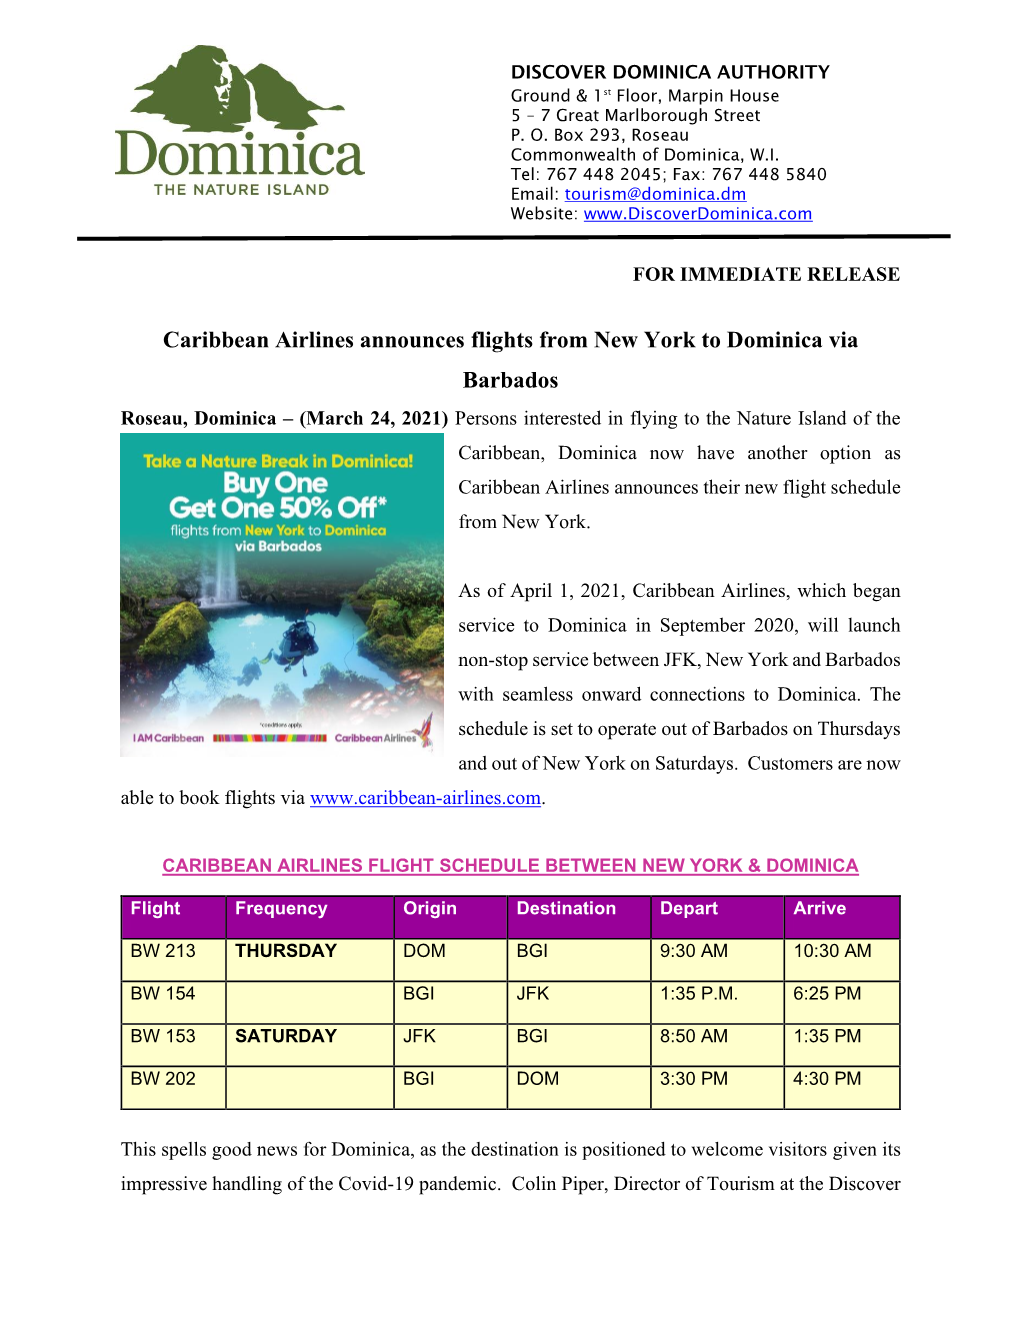 Caribbean Airlines Announces Flights from New York to Dominica Via